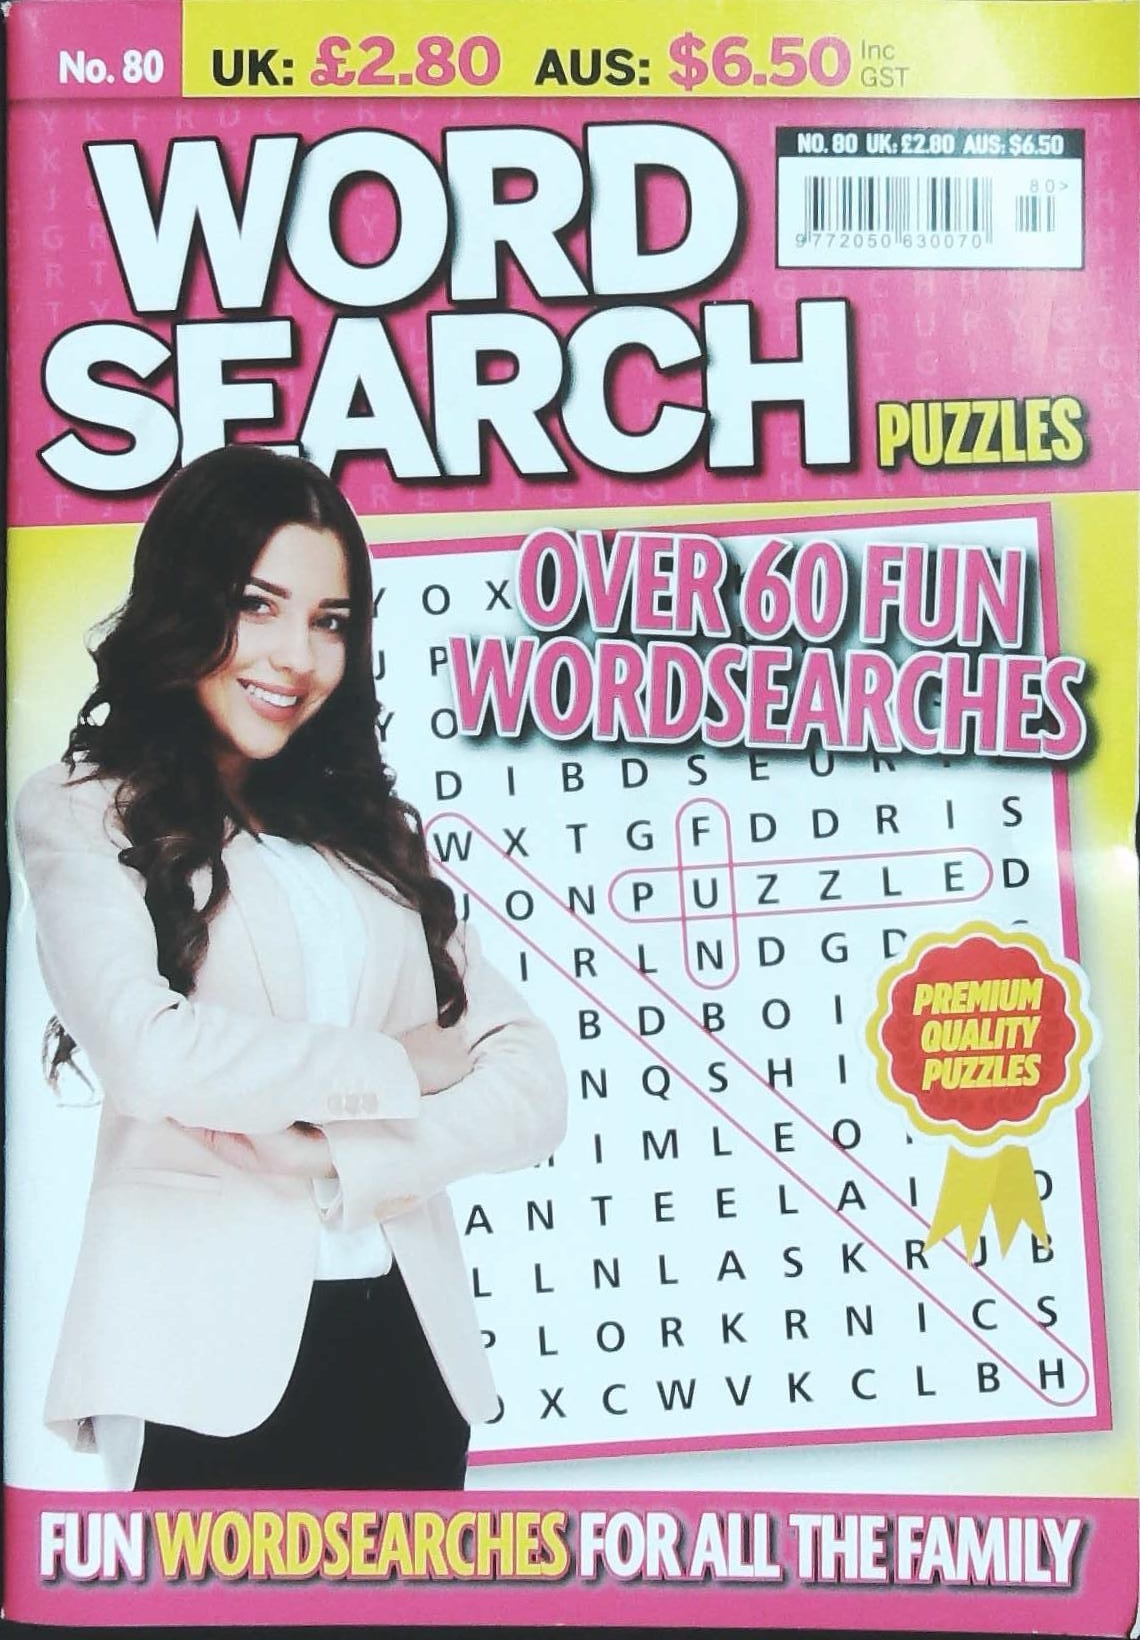 WORDSEARCH PUZZLES